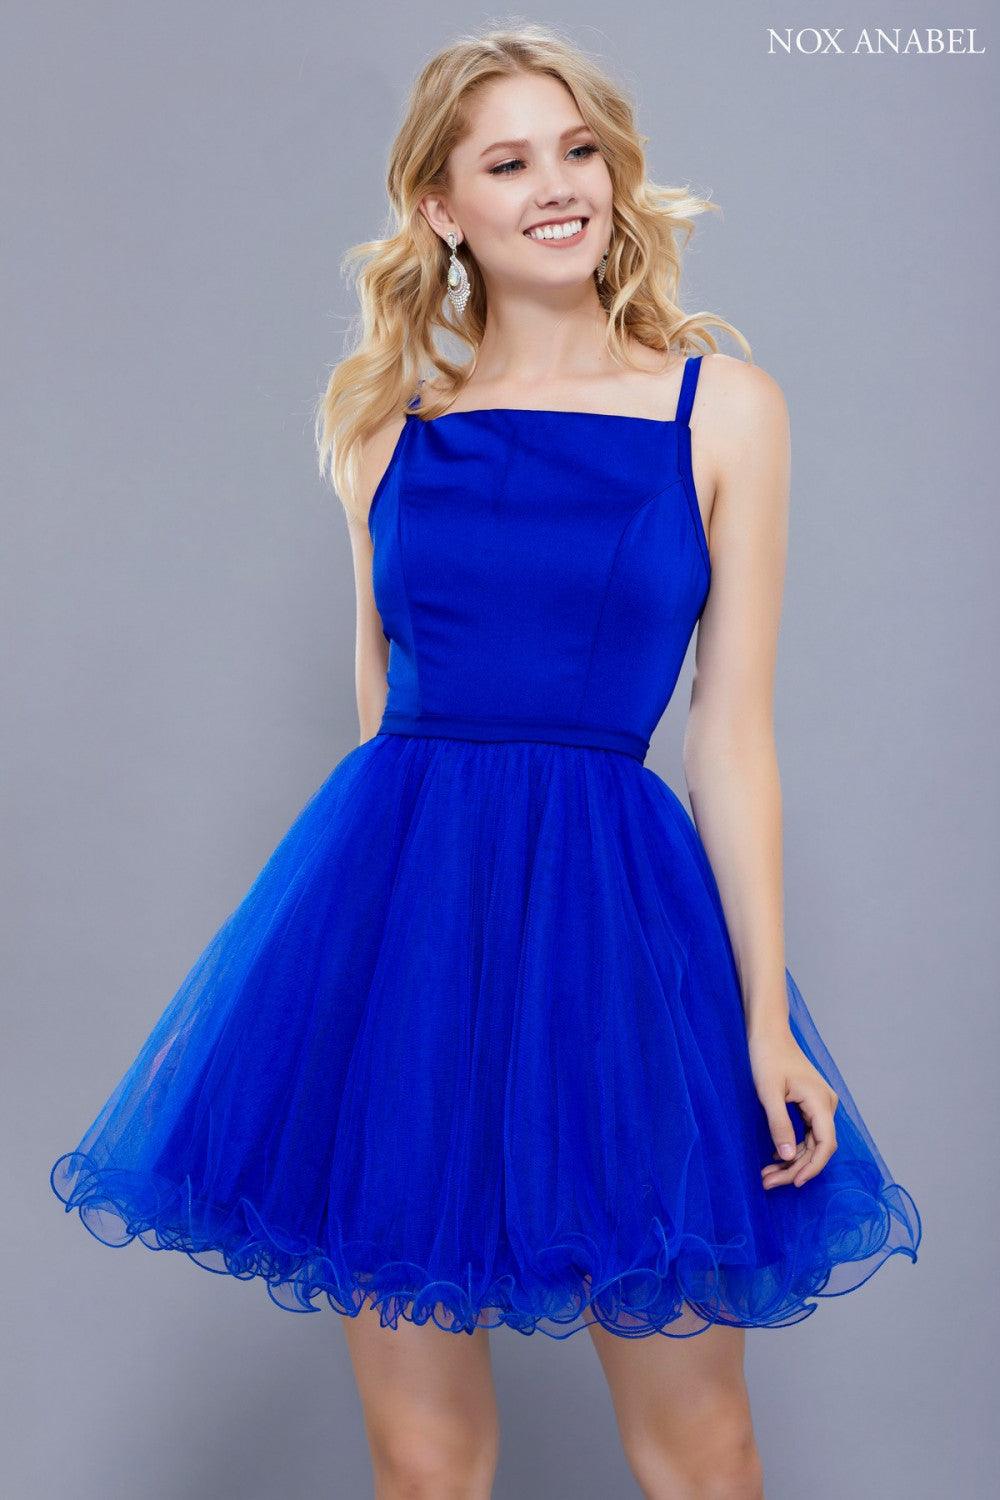 Short Sleeveless Tulle Formal Homecoming Prom Dress - The Dress Outlet Nox Anabel